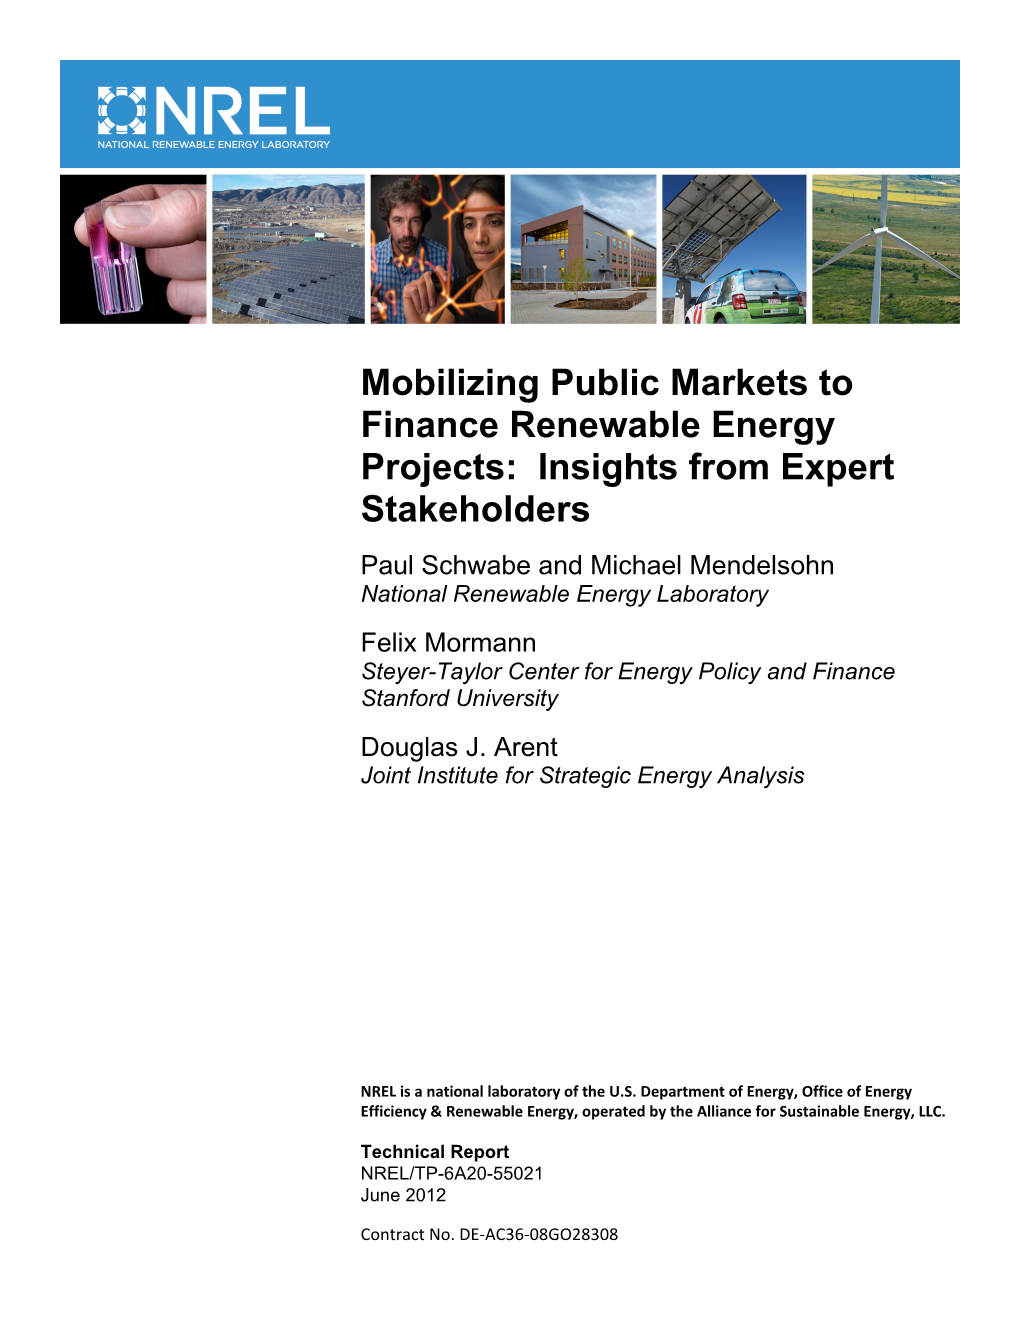 Mobilizing Public Markets to Finance Renewable Energy Projects: Insights from Expert Stakeholders